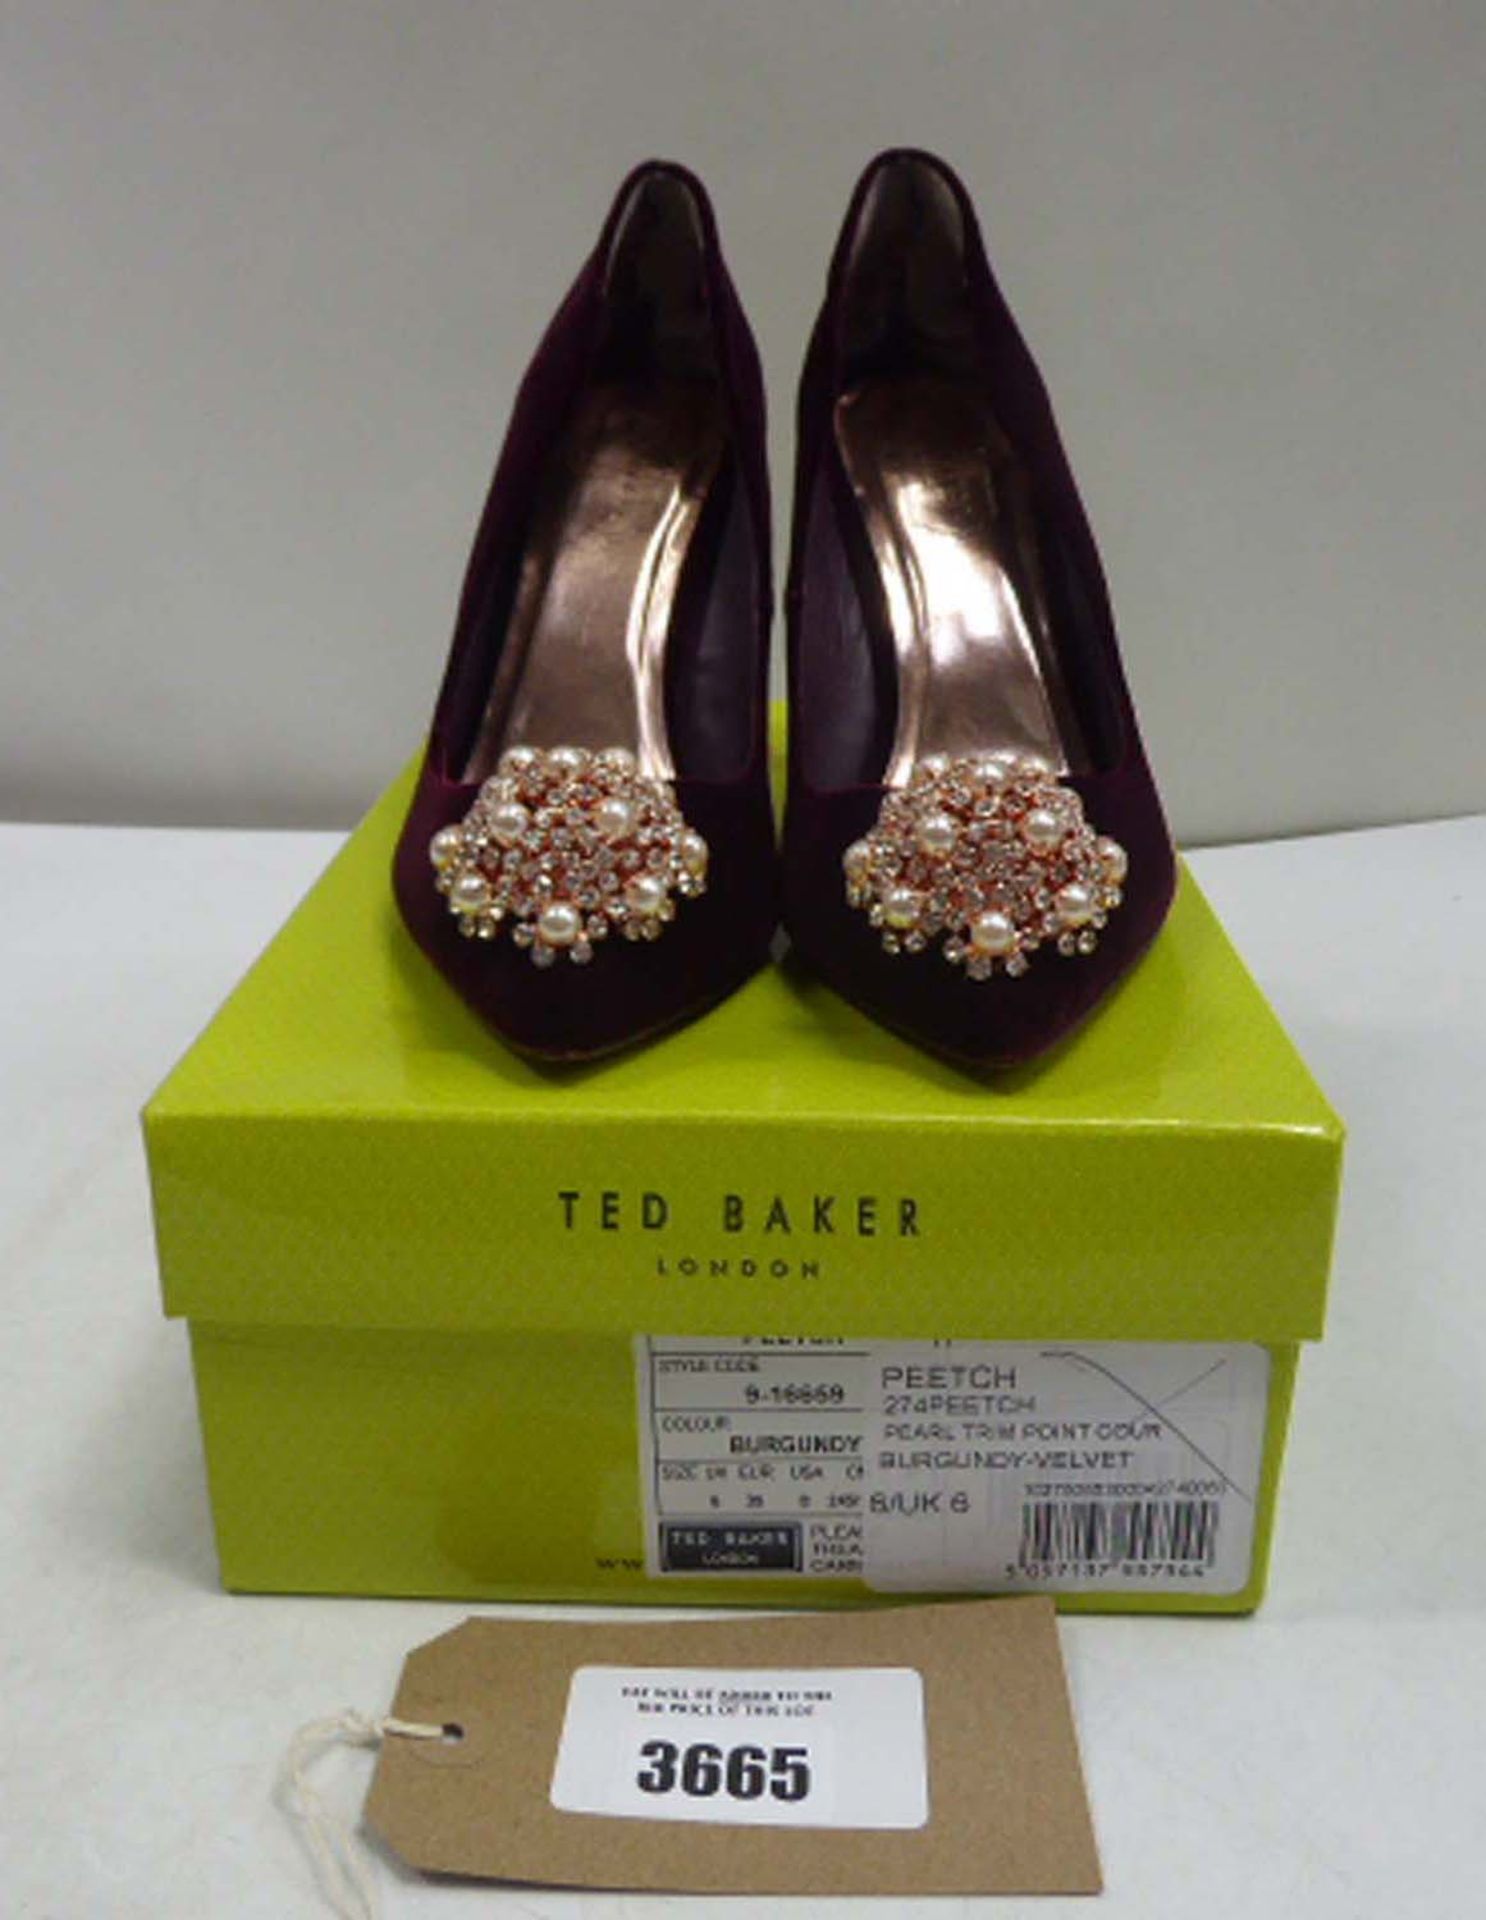 Ted Baker Peetch heels size 6 (used)